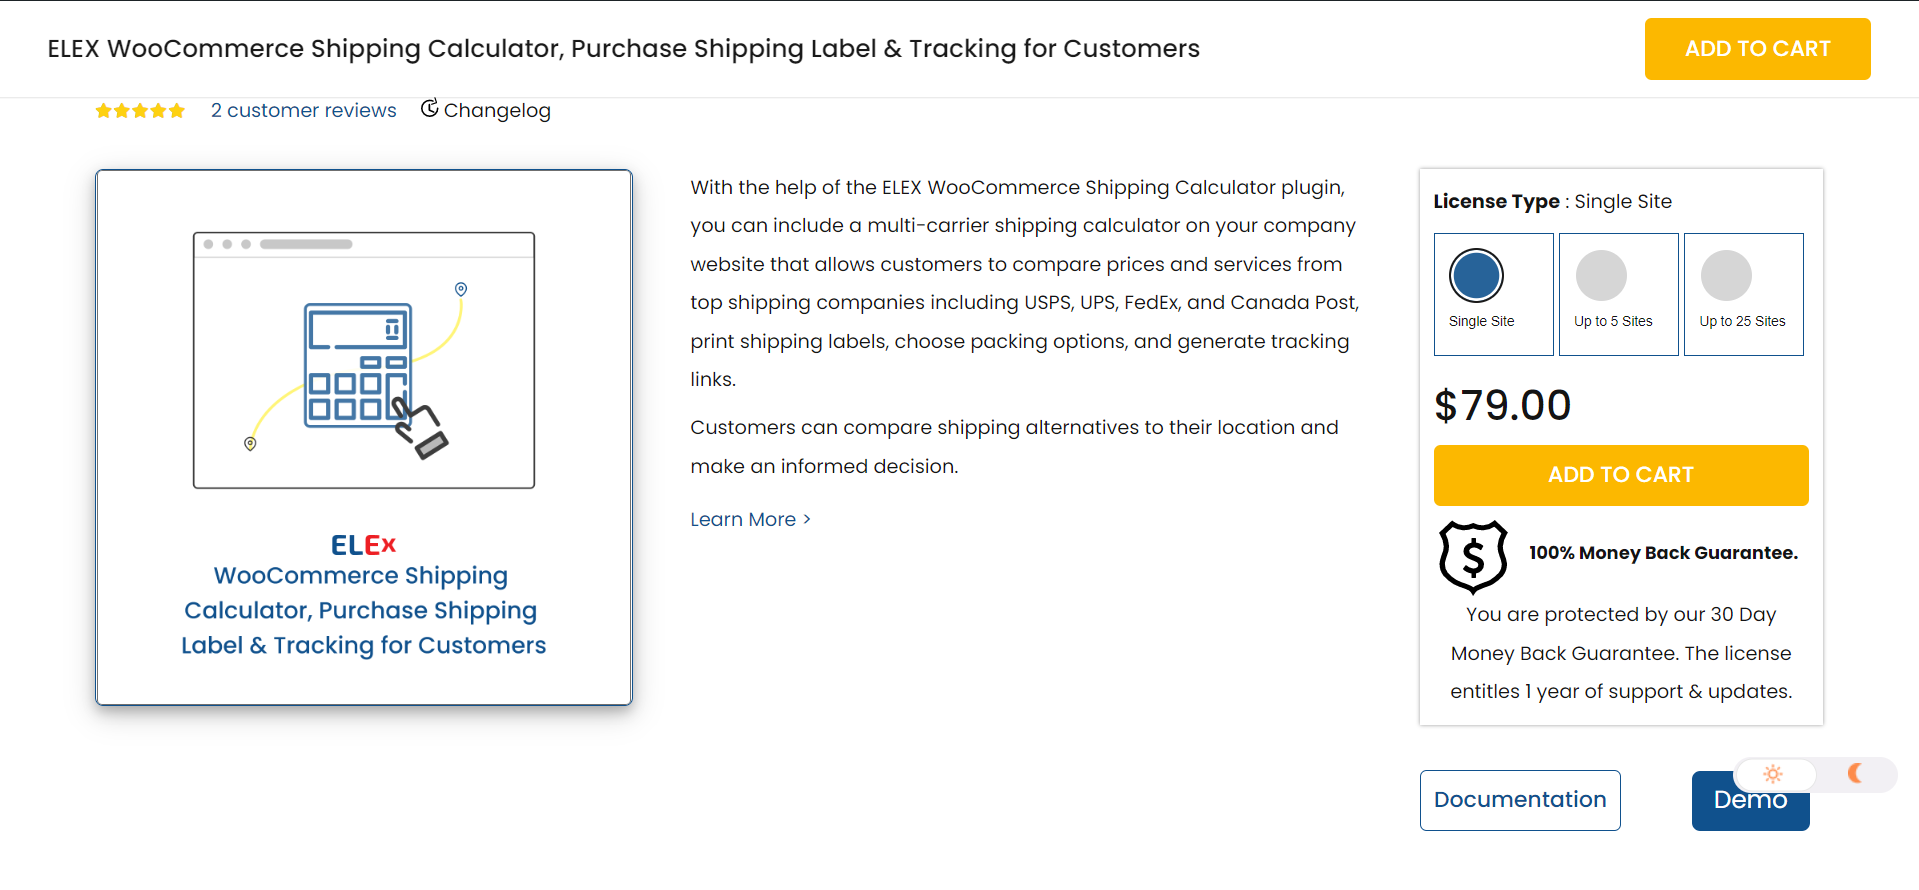 ELEX WooCommerce Shipping Calculator, Purchase Shipping Label & Tracking for Customers